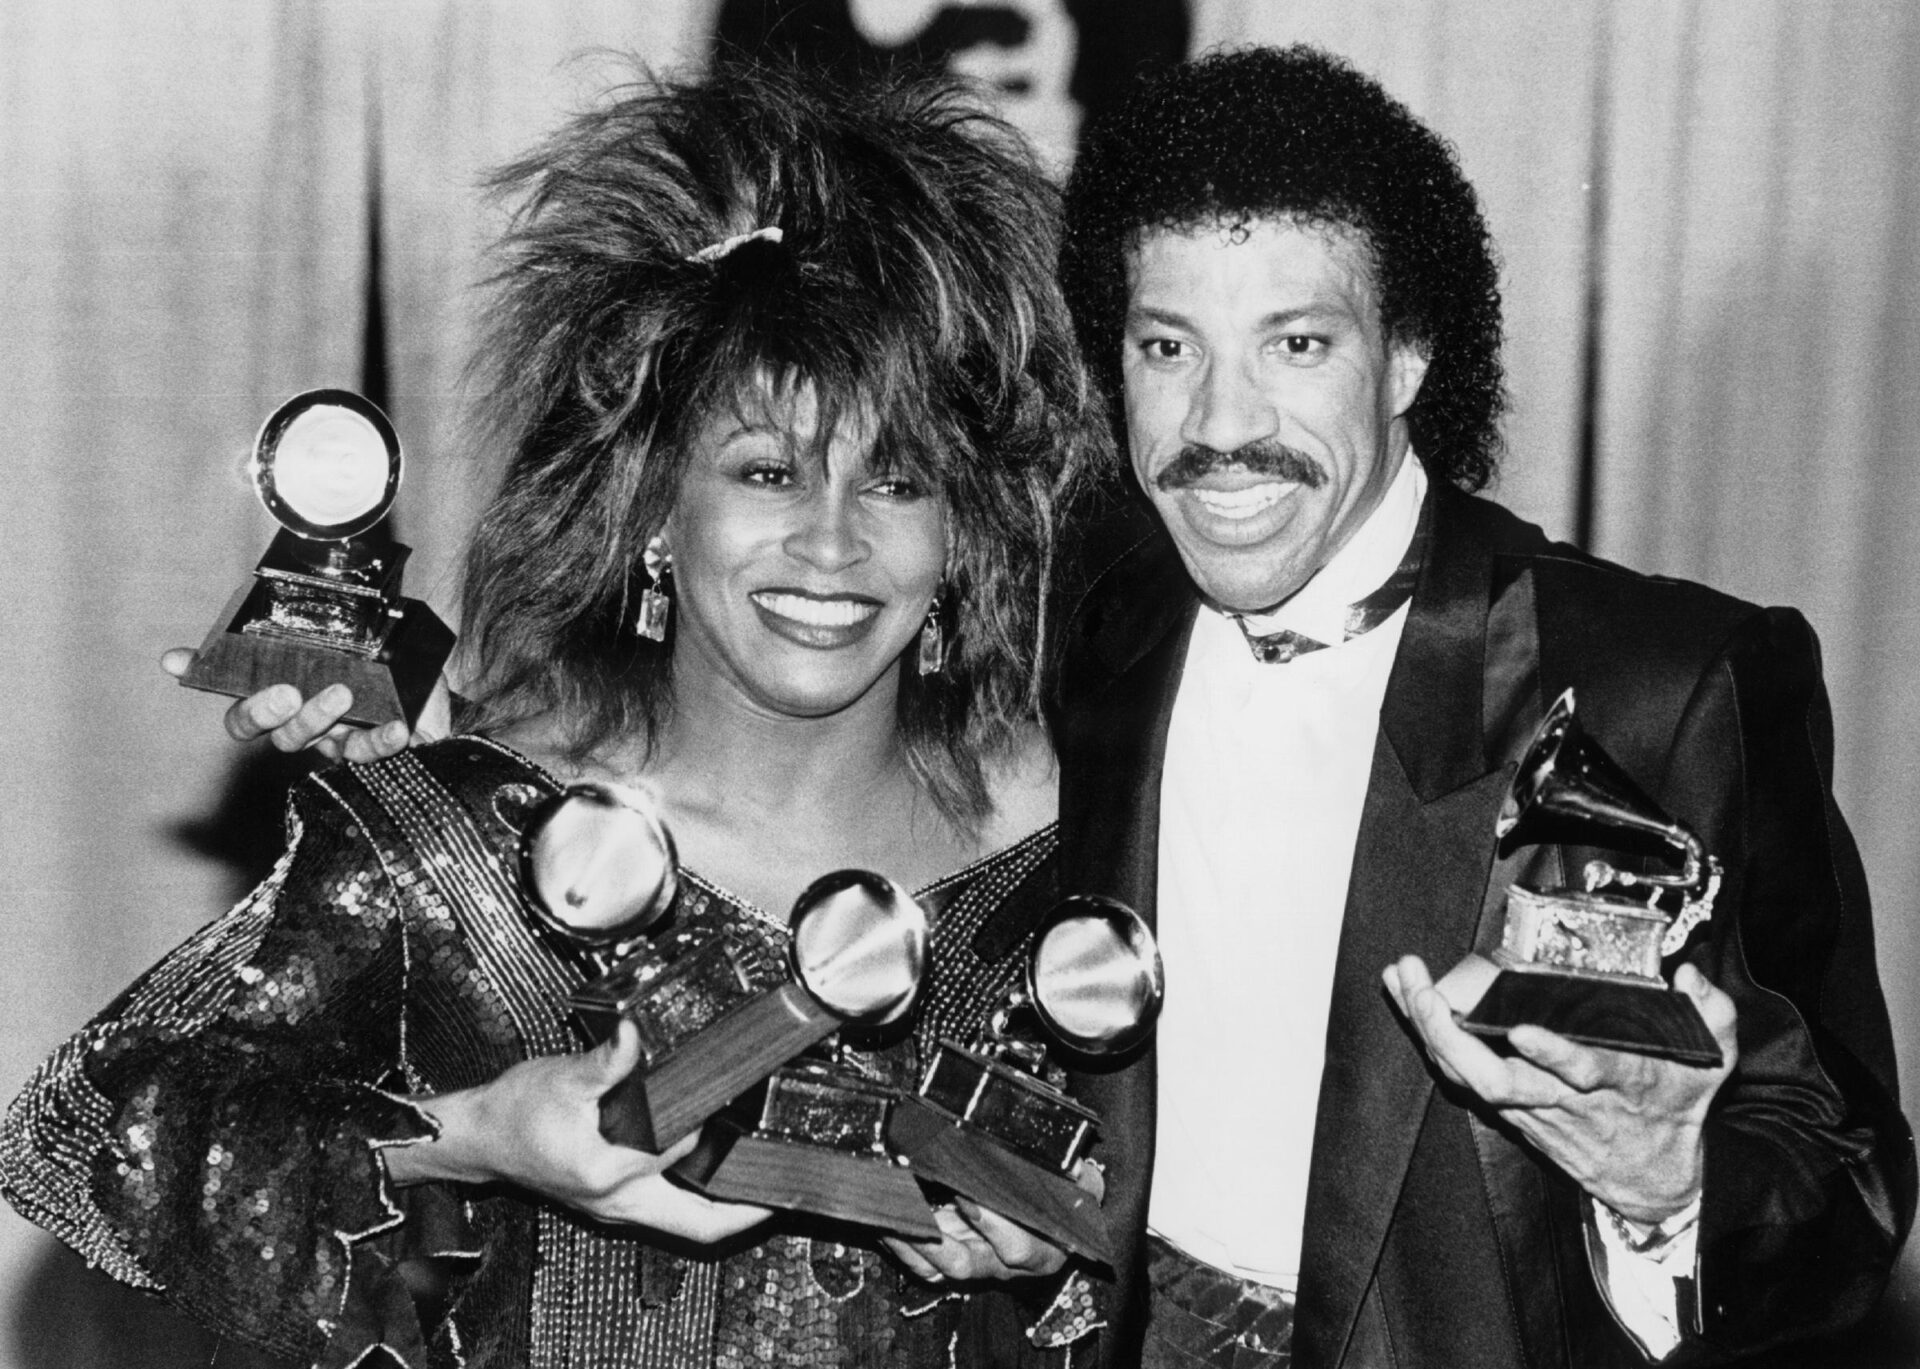 Tina Turner at the 1985 Grammy Awards with Lionel Richie and his award - Chris Walter // Getty Images